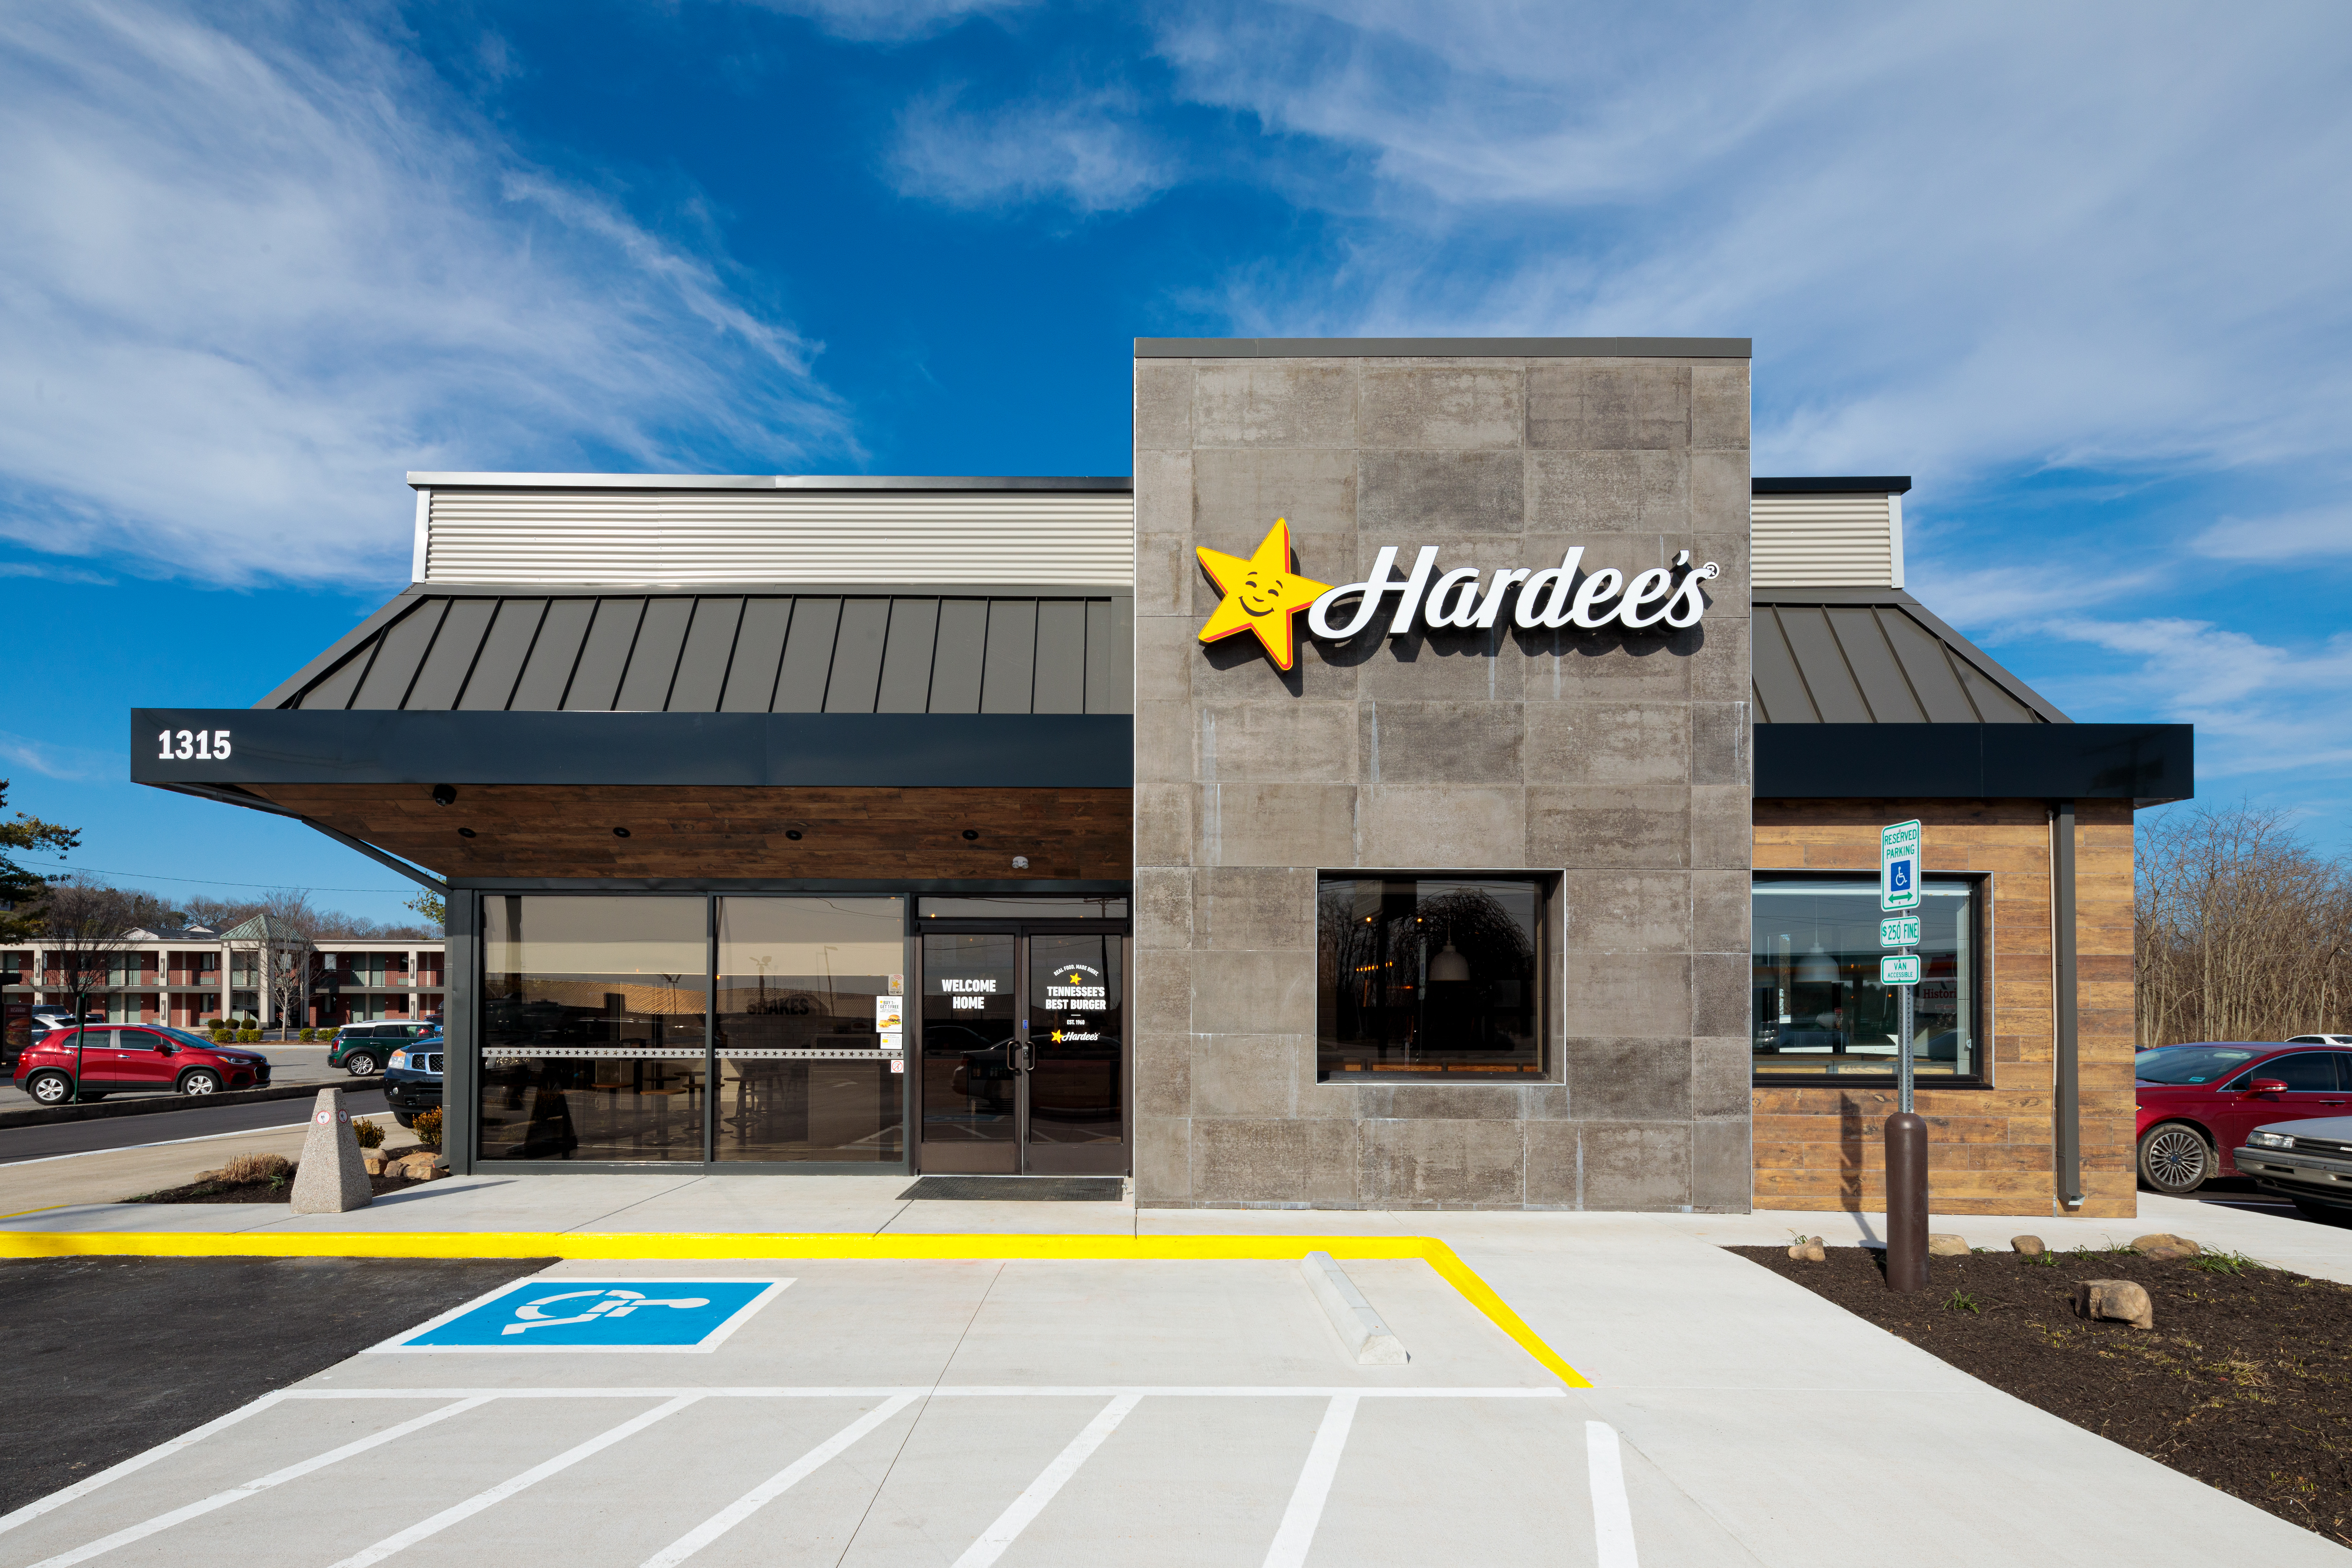 Hardee's restaurant storefront with parking lot in front